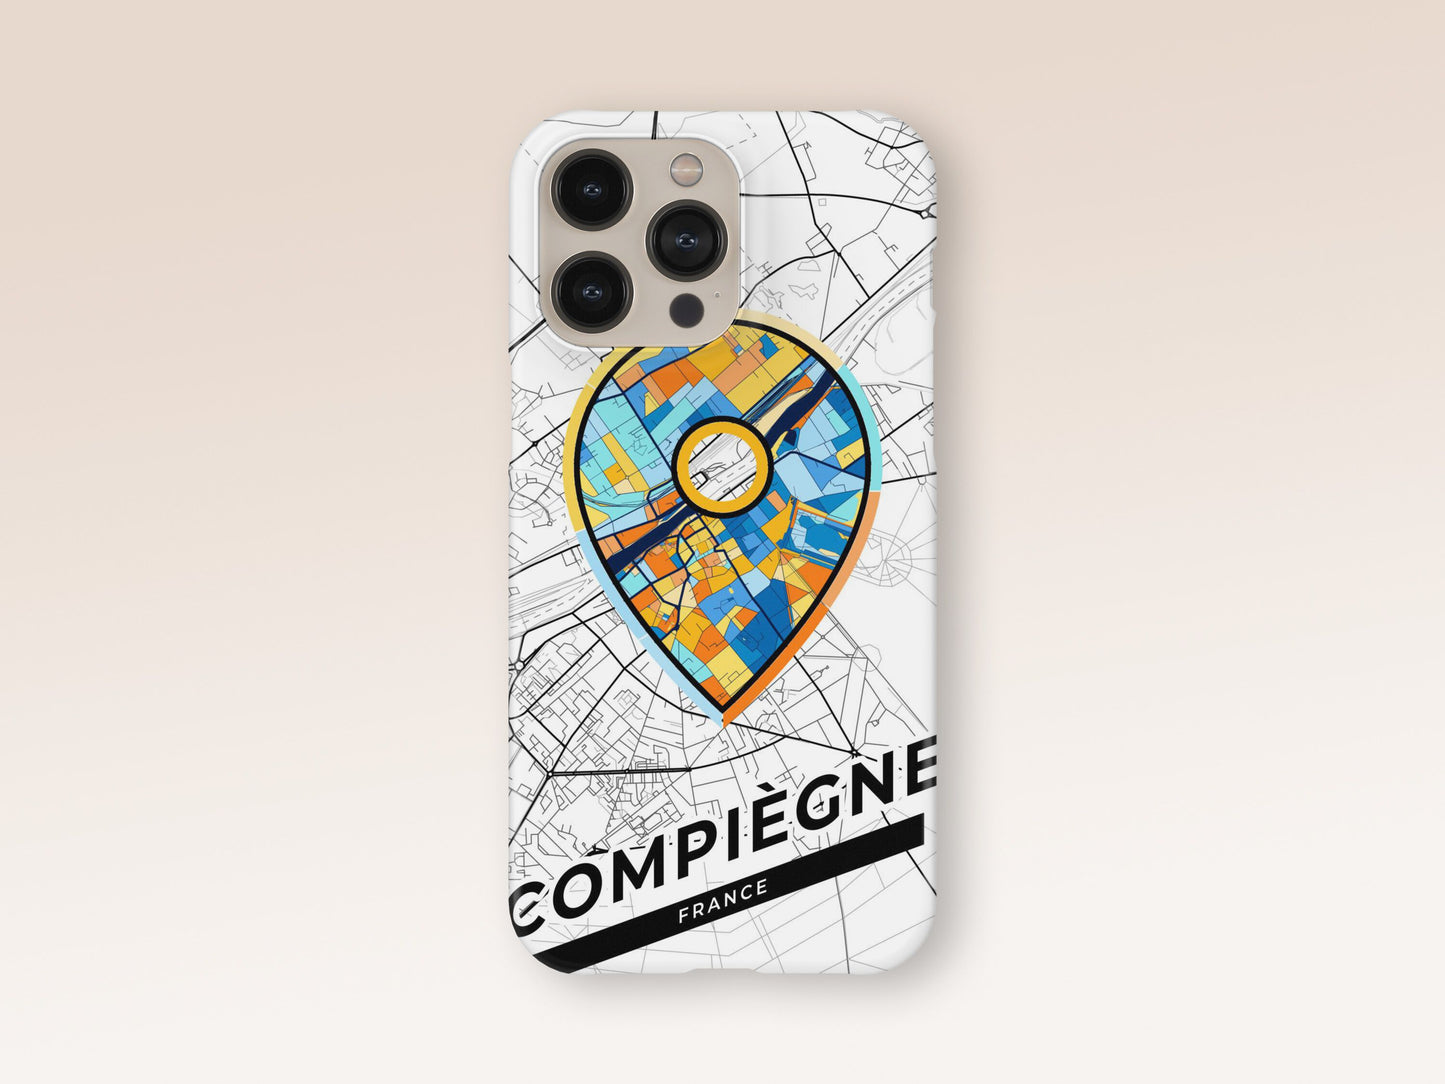 Compiègne France slim phone case with colorful icon. Birthday, wedding or housewarming gift. Couple match cases. 1